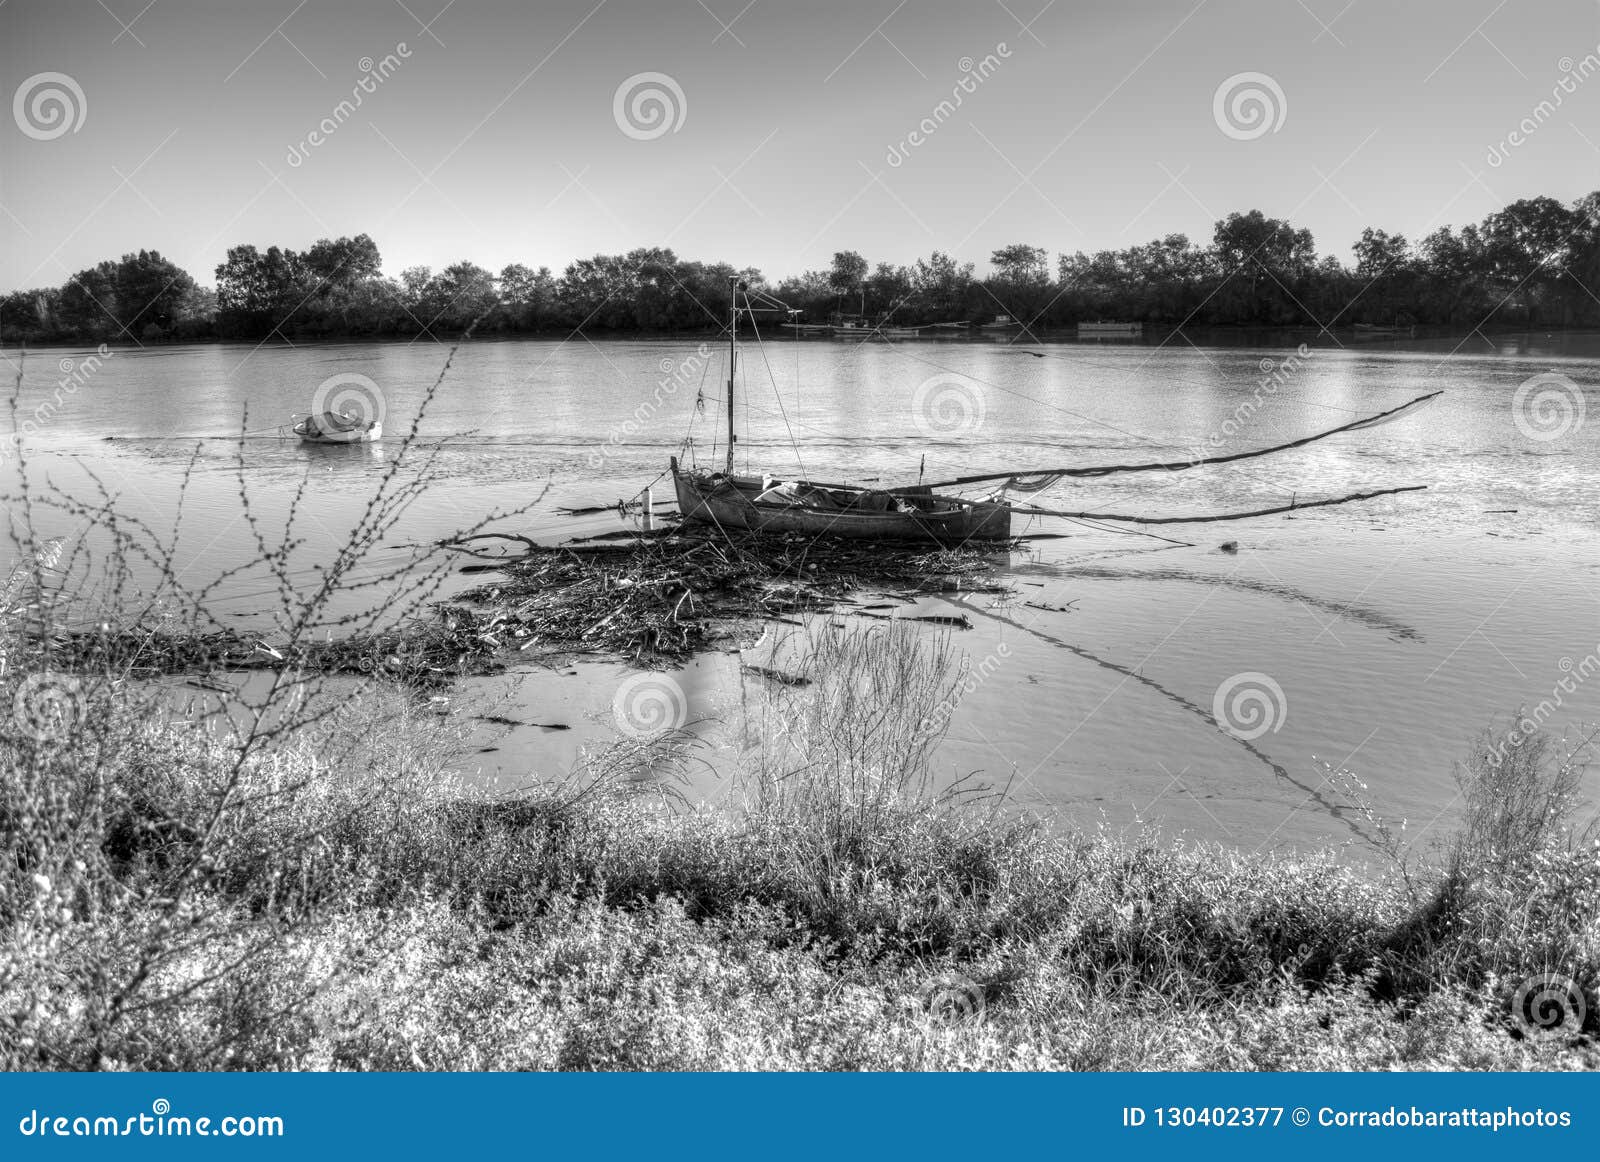 a boat moored surrounded by the debris of the flood of the river